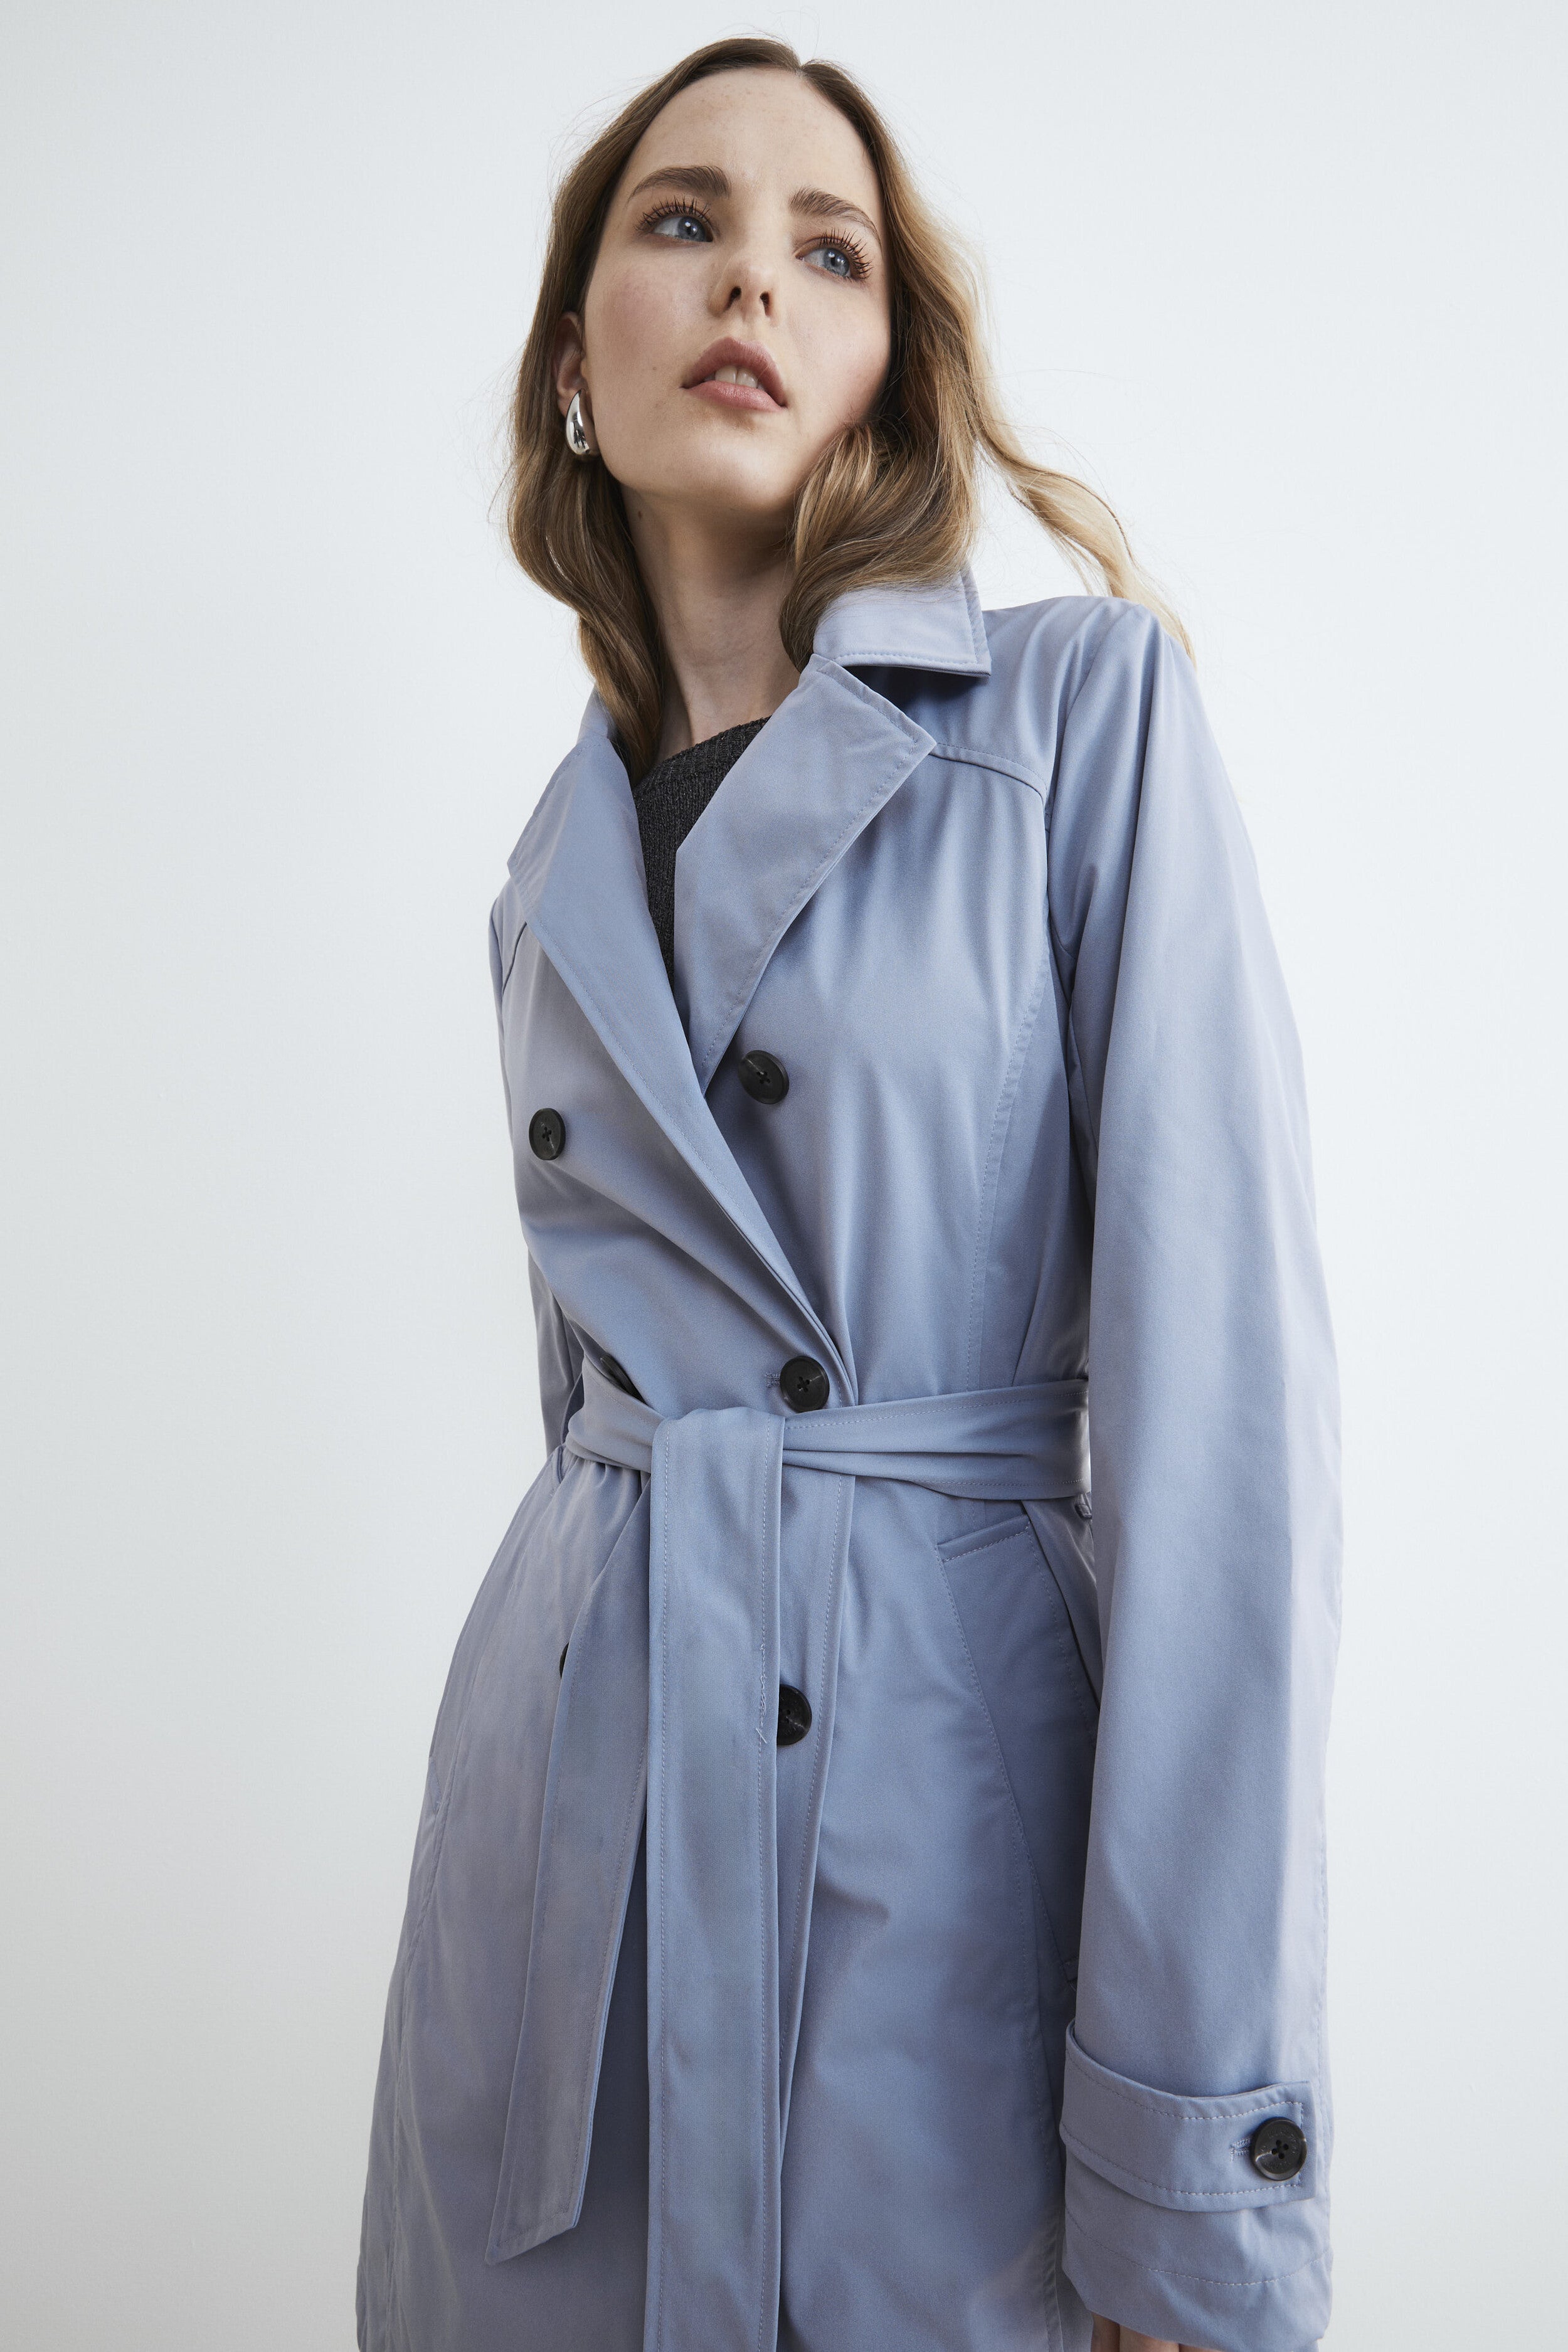 Women’s double-breasted trench coat - Dust grey